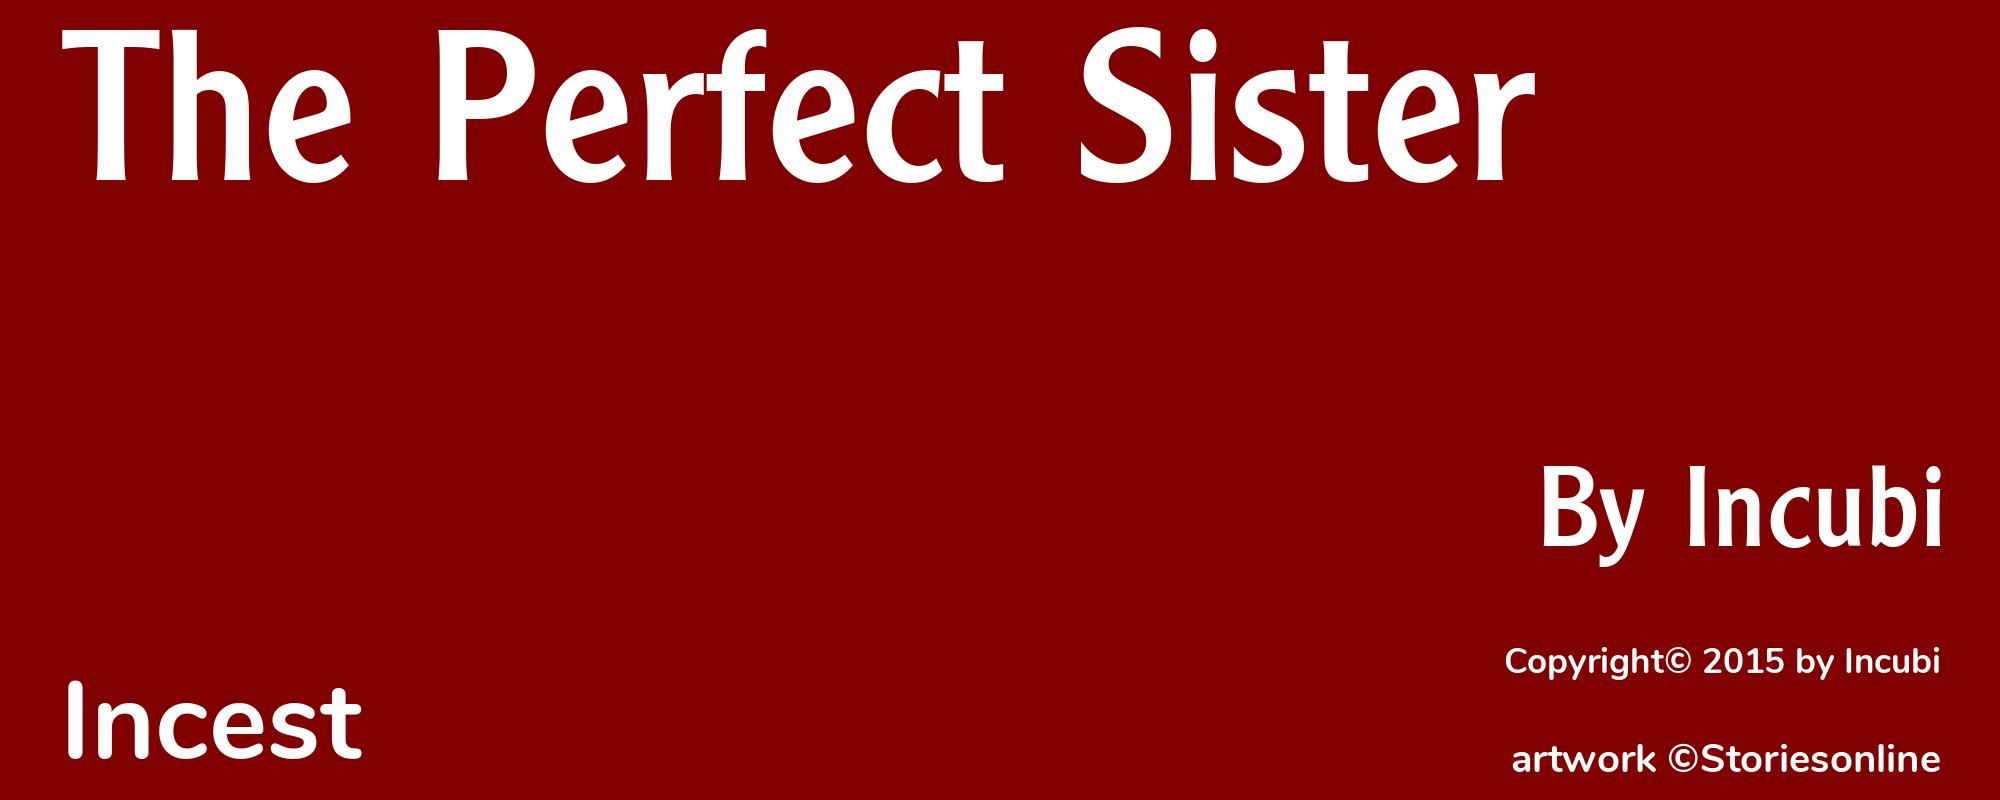 The Perfect Sister - Cover